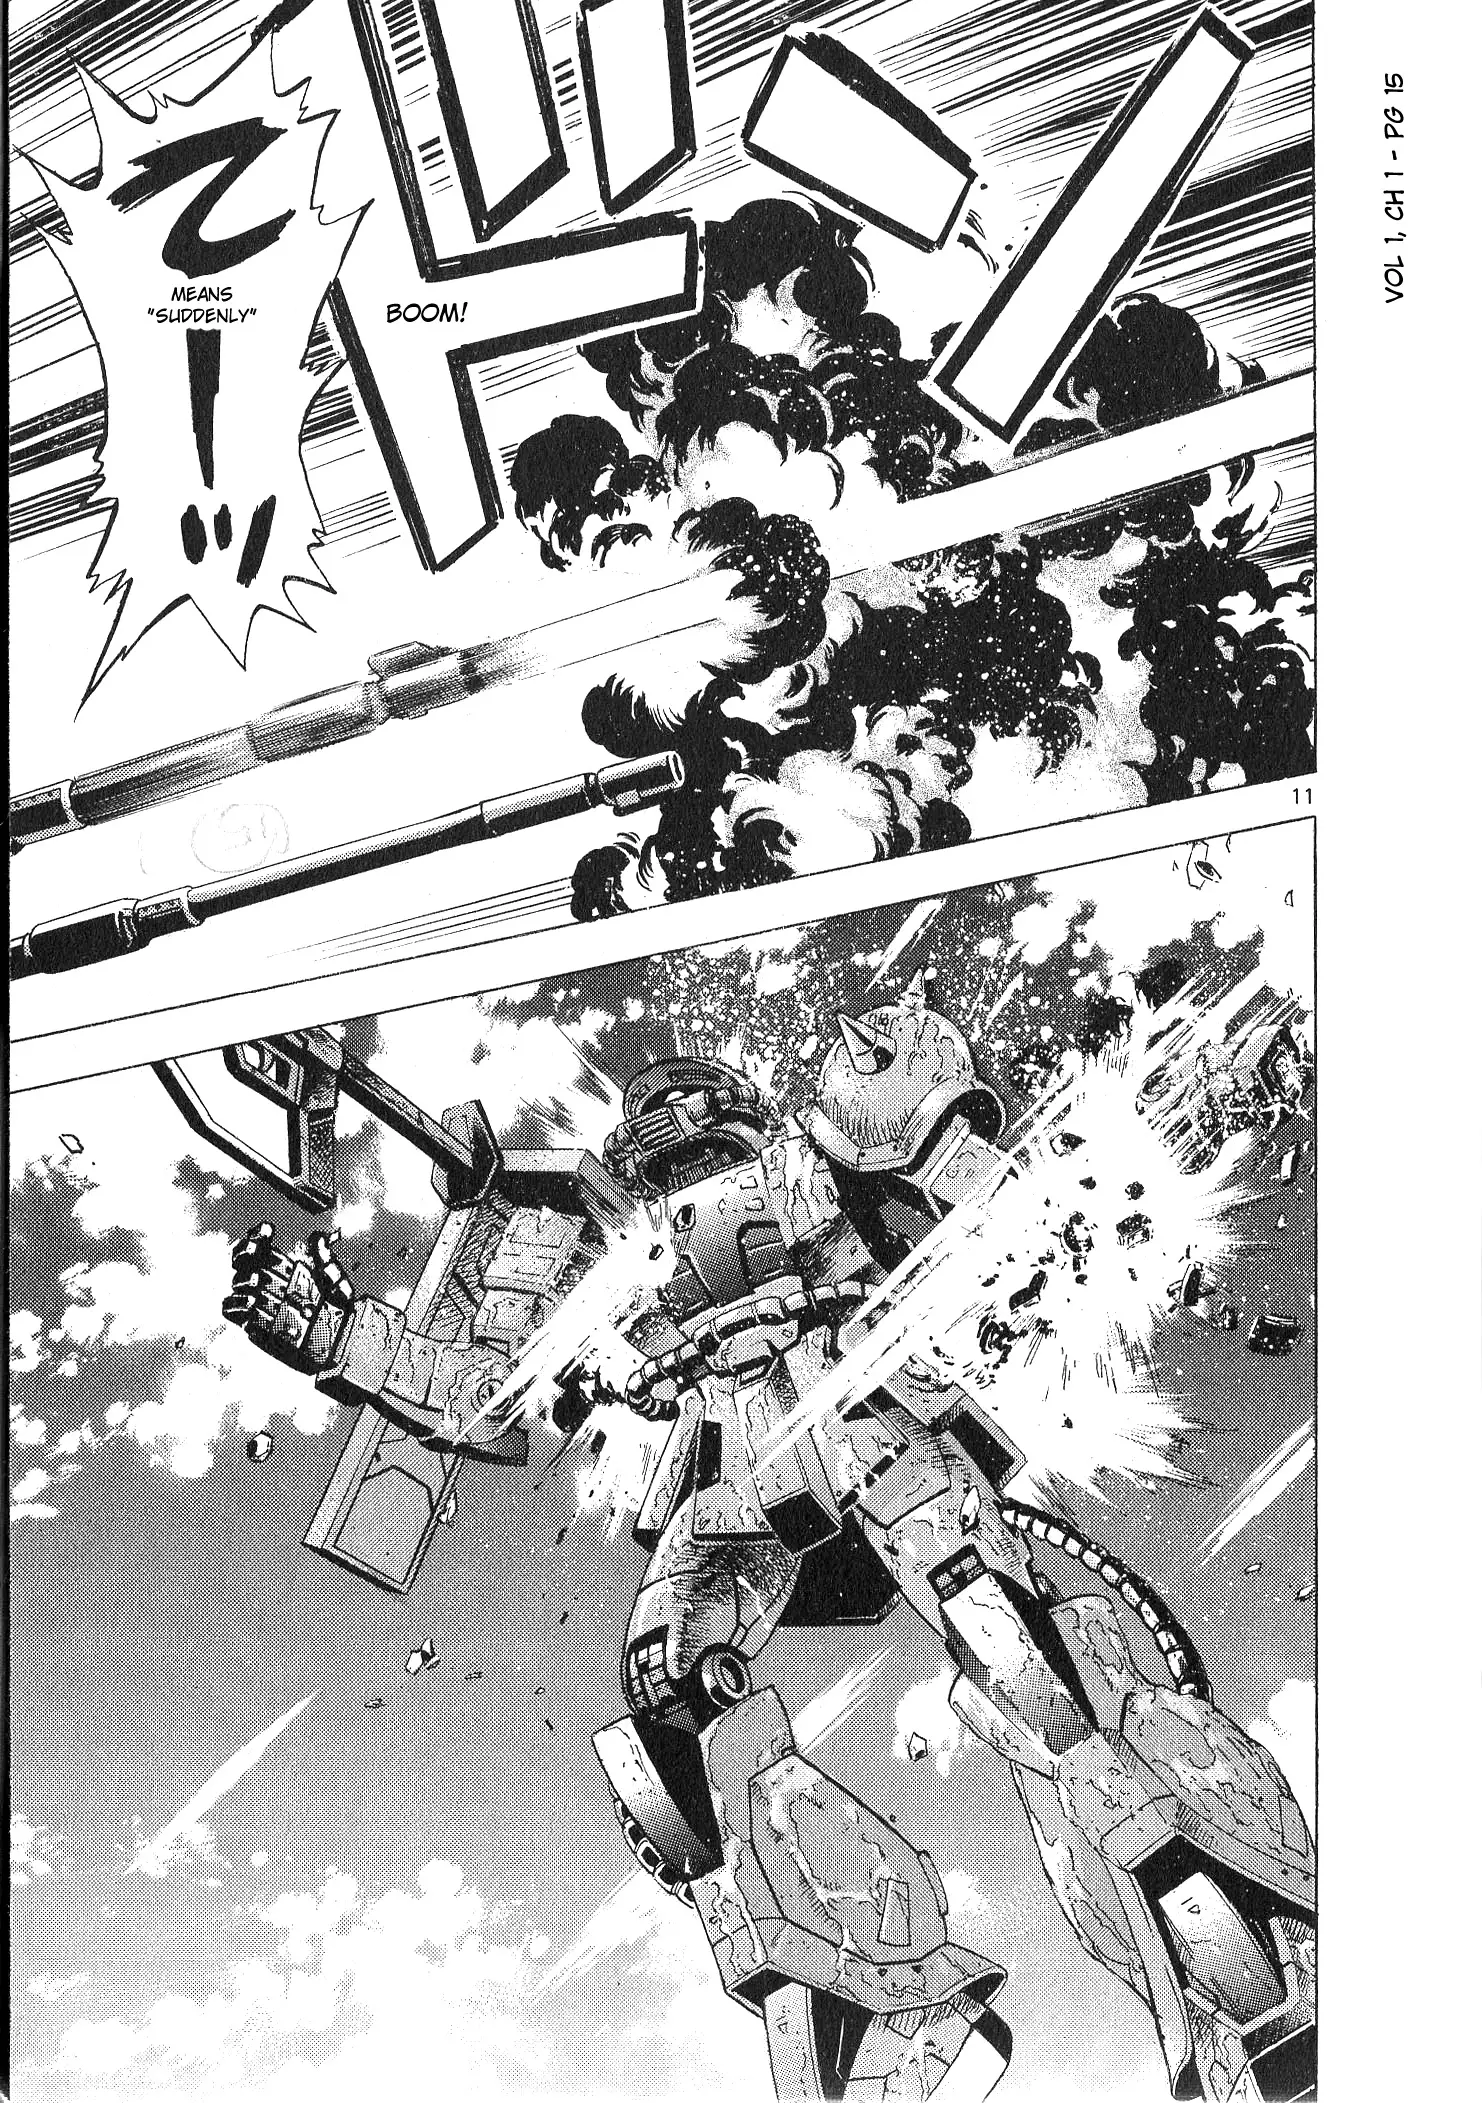 Mobile Suit Gundam Aggressor - 1 page 11-a9f69528